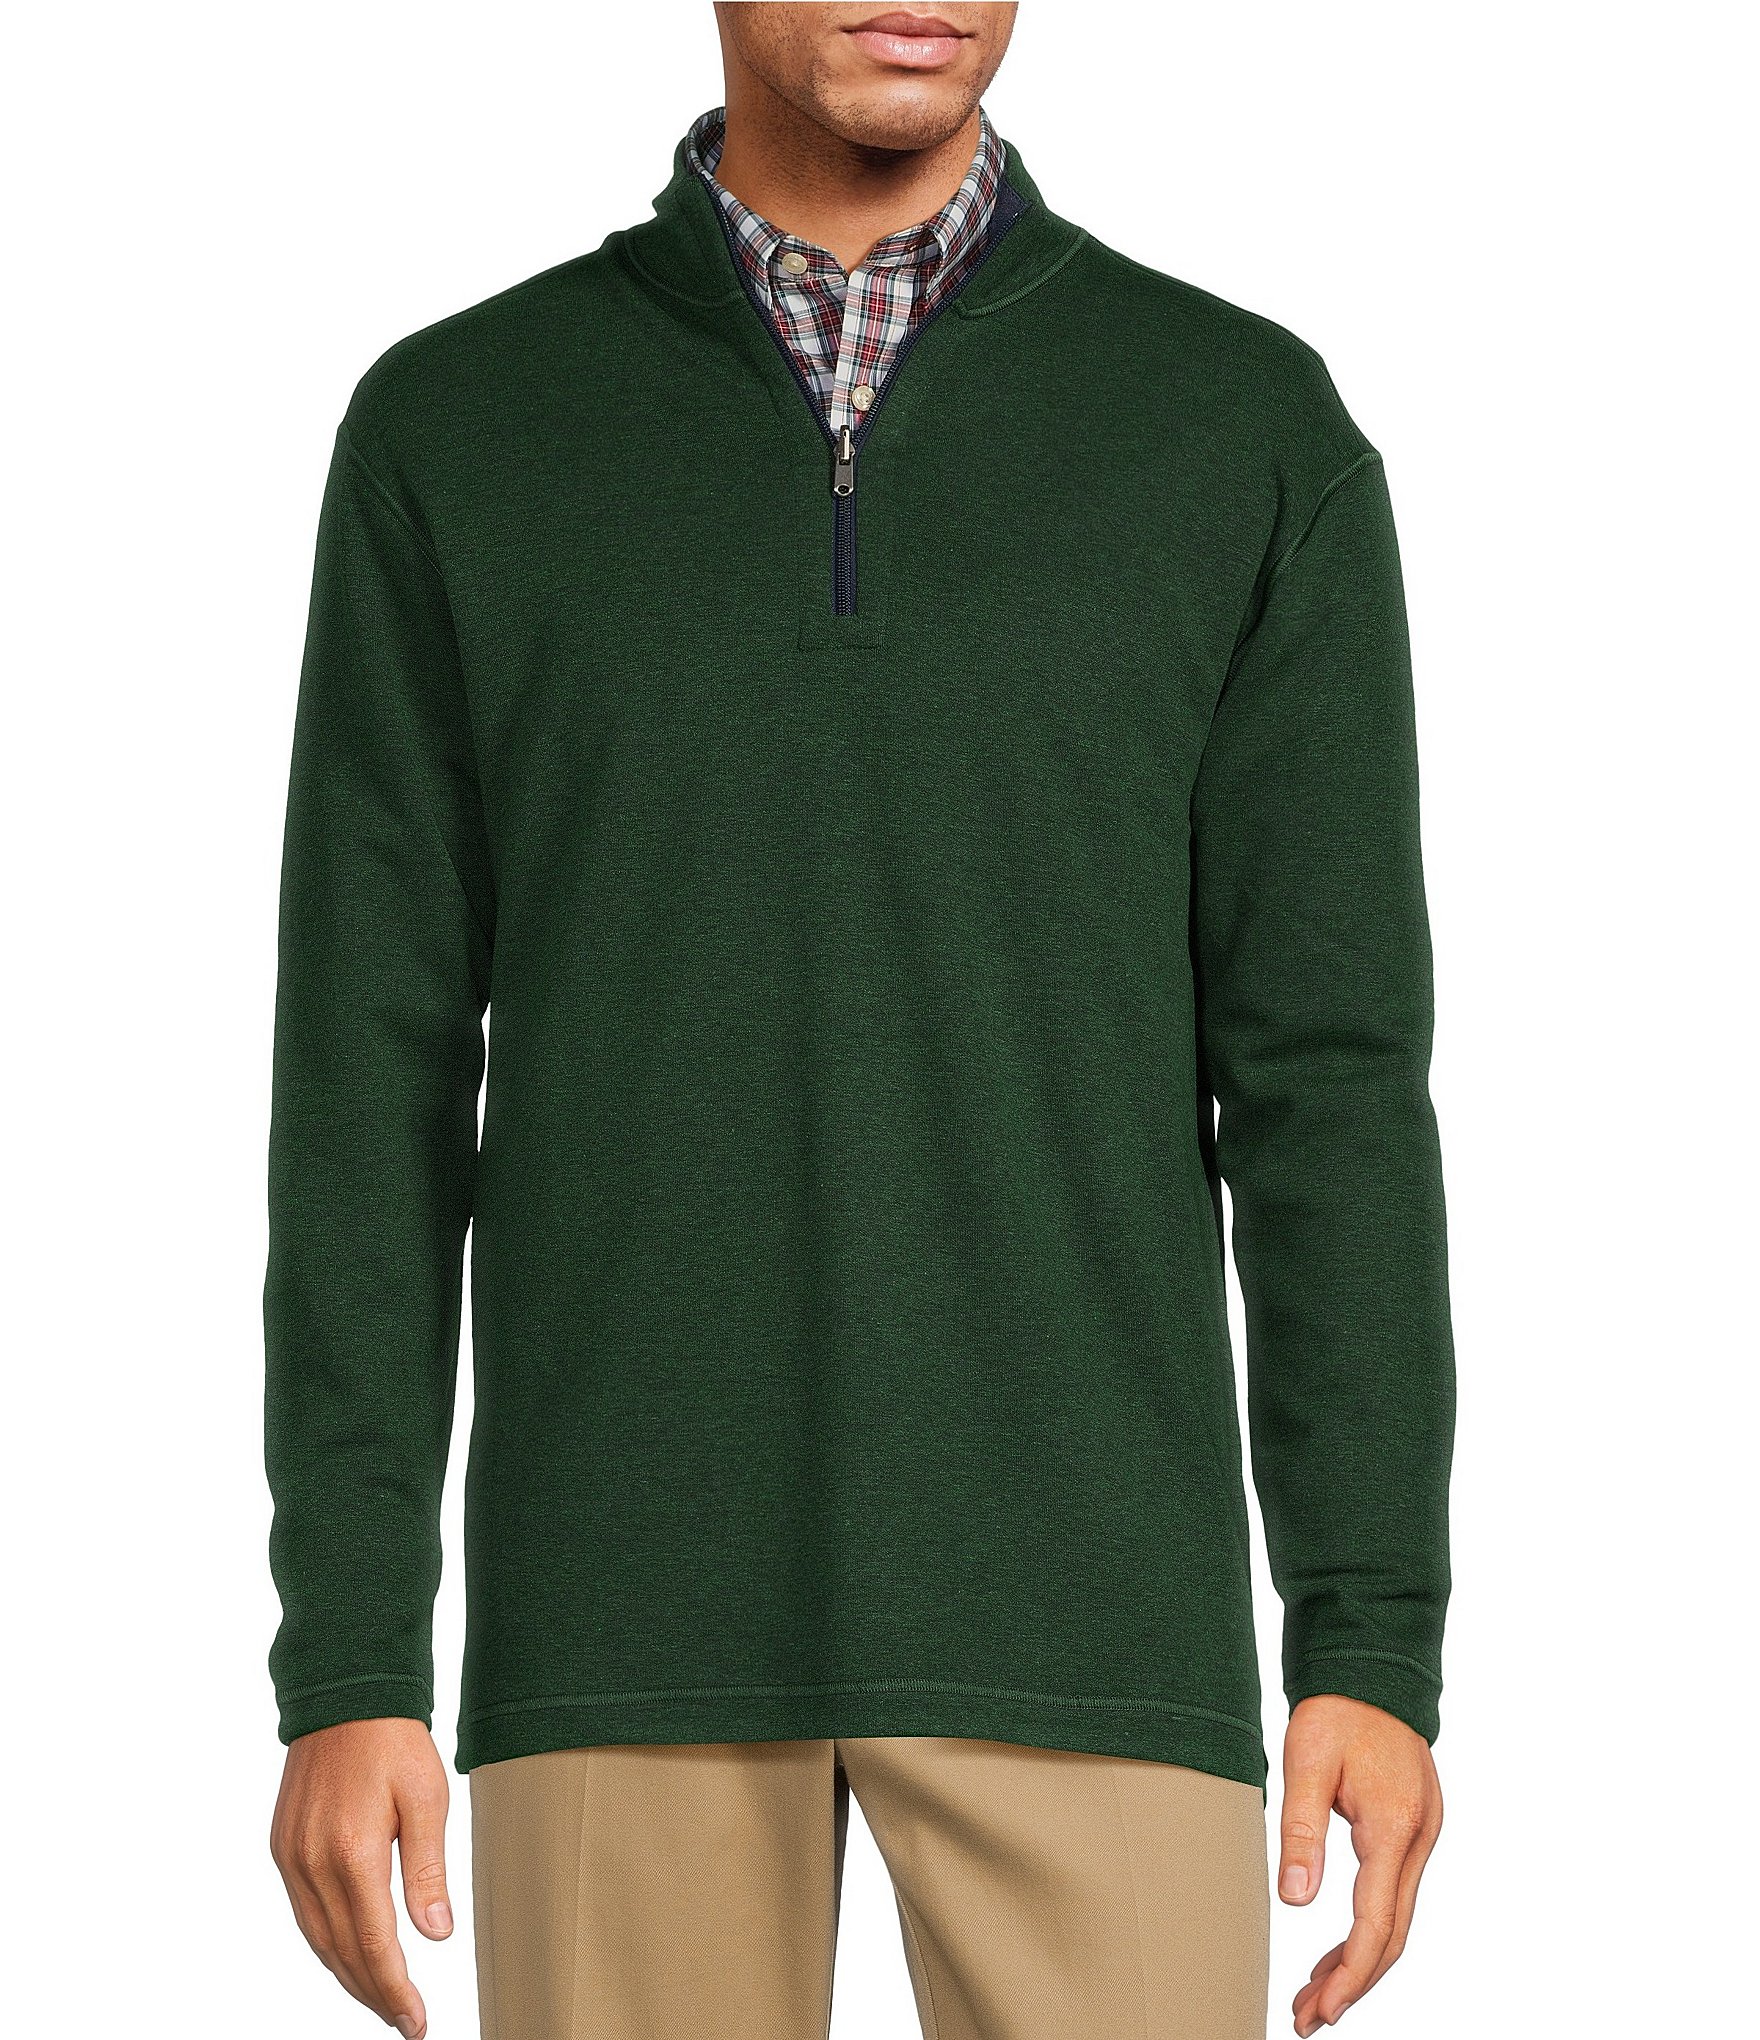 Roundtree & Yorke Long Sleeve Solid Reversible Quarter-Zip Pullover